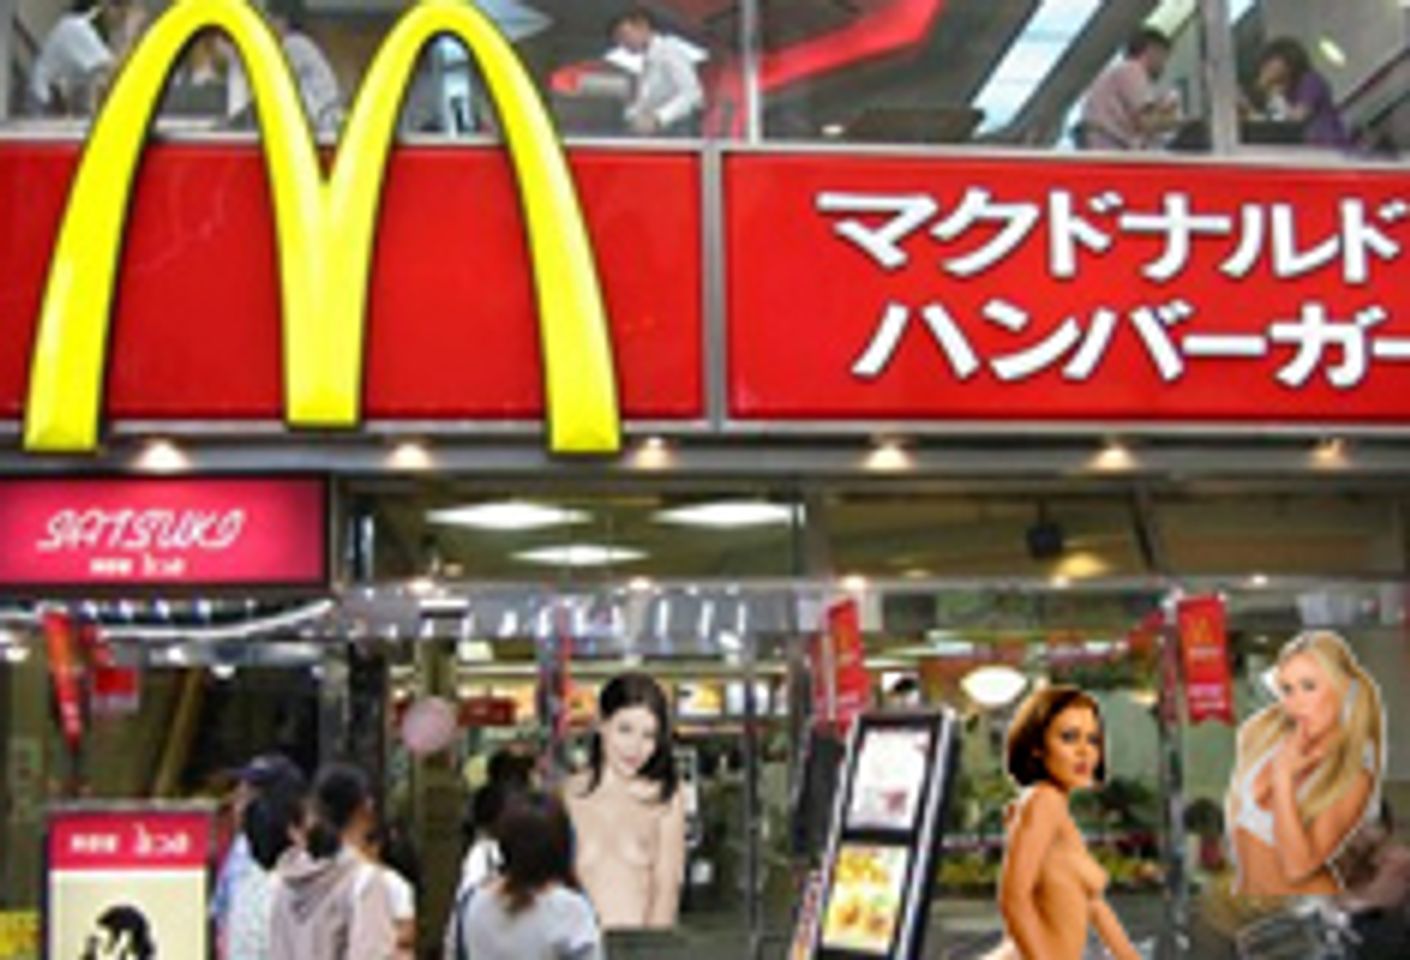 Several Arrested for Shooting Porn at Japanese McDonald's